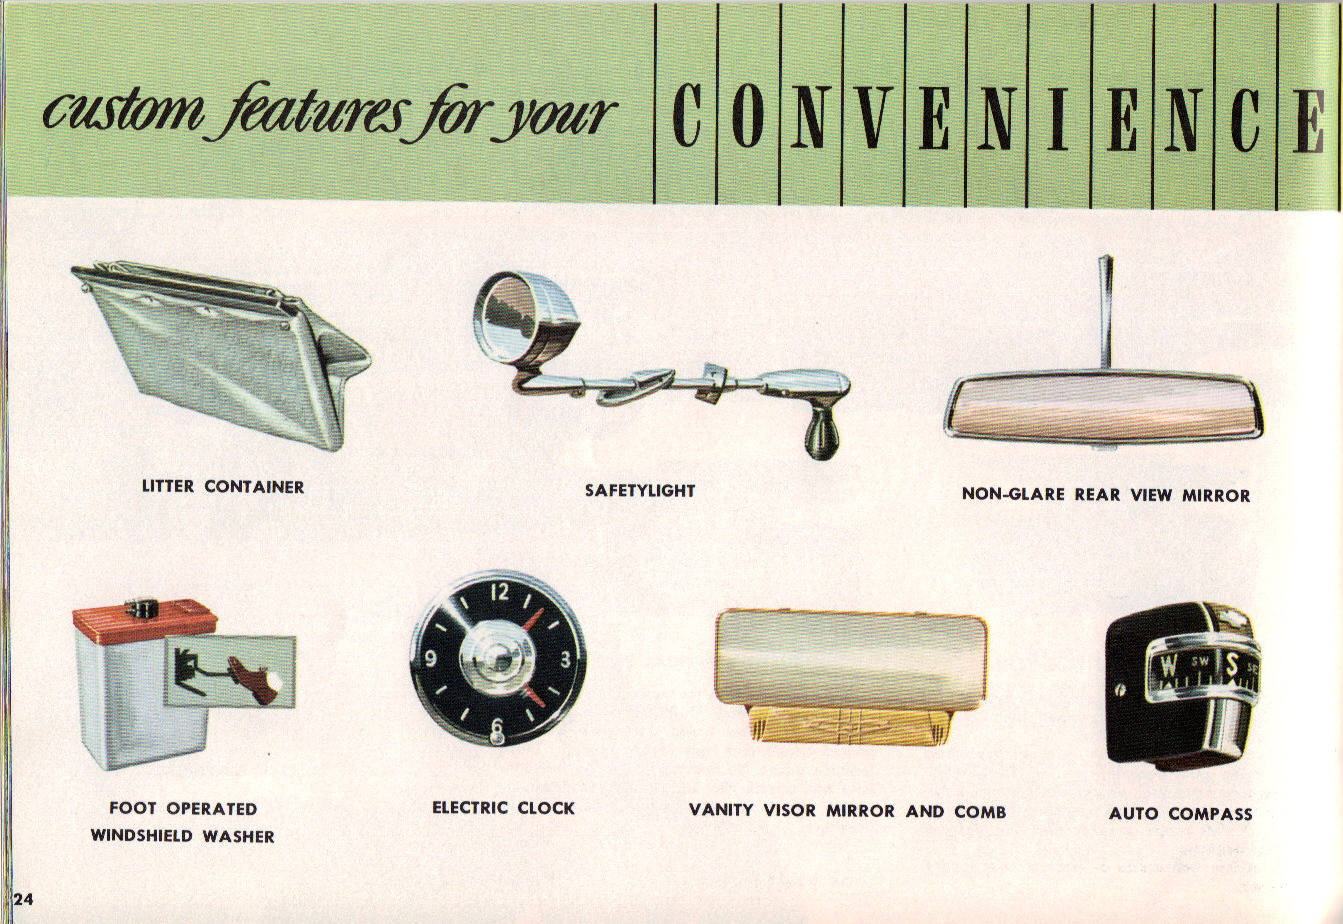 1960 Chevrolet Custom Features Brochure Page 26